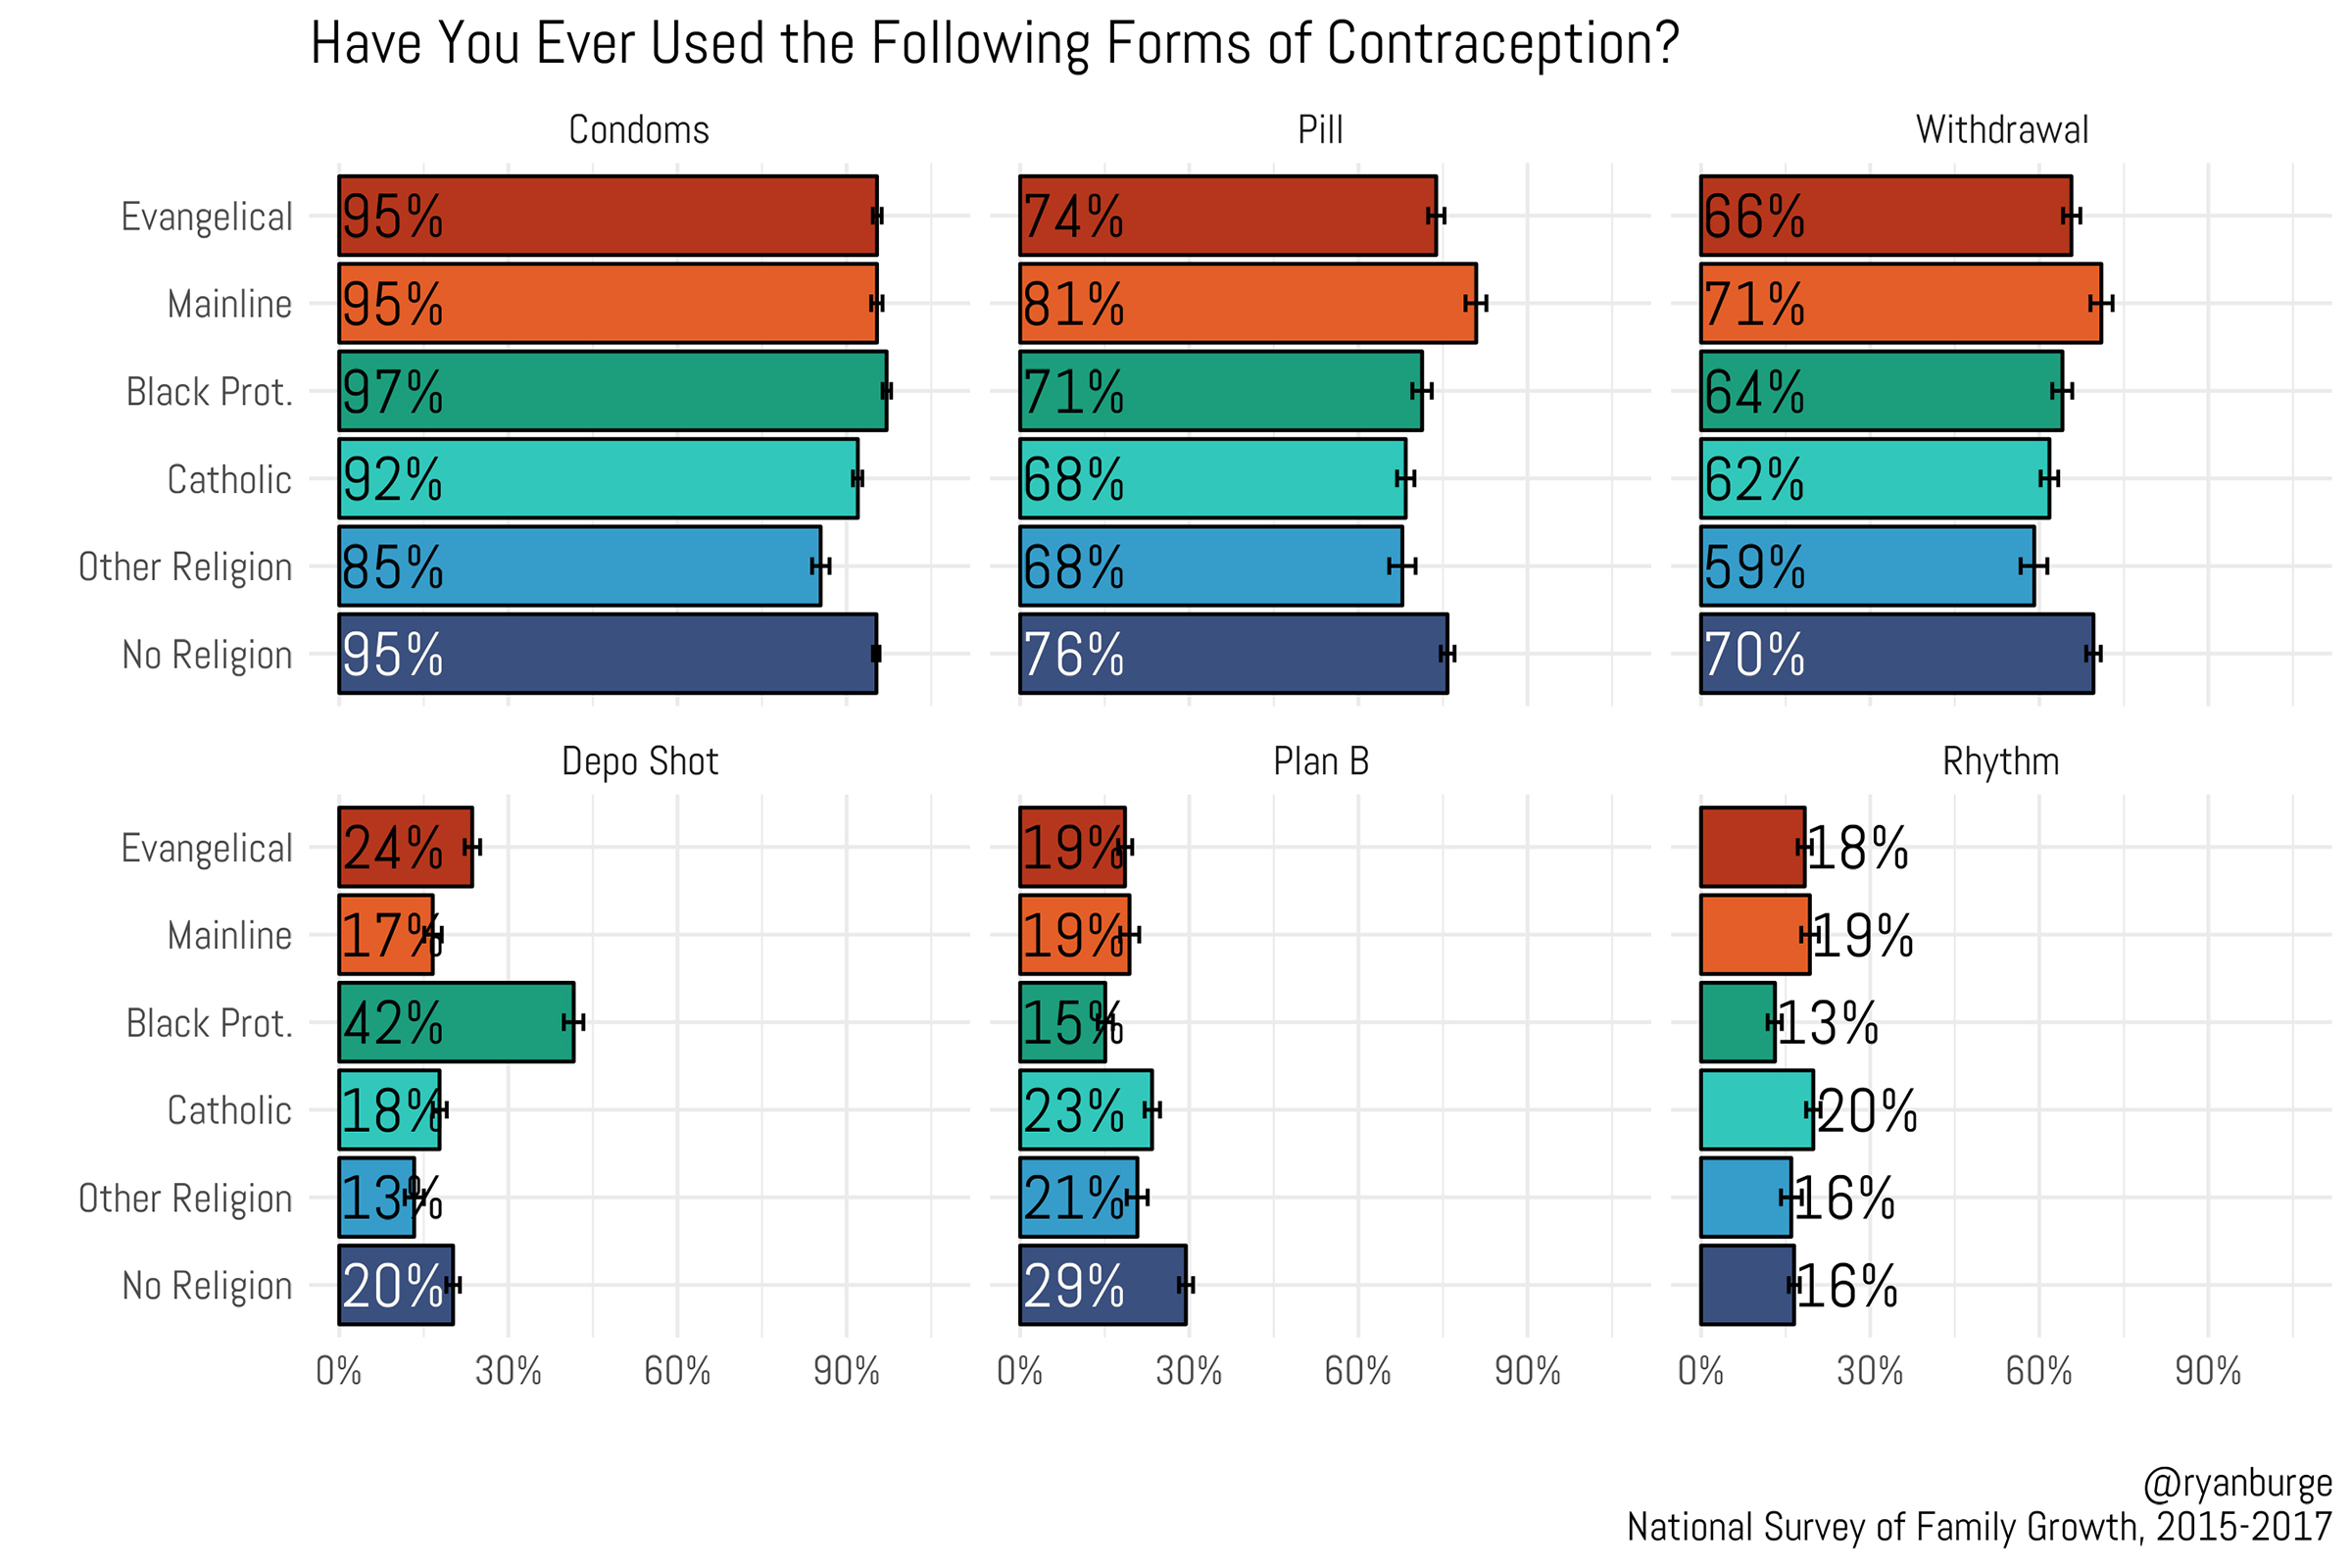 "Have You Ever Used the Following Forms of Contraception?, Grouped By Religious Tradition" (Graphic courtesy of Ryan Burge)